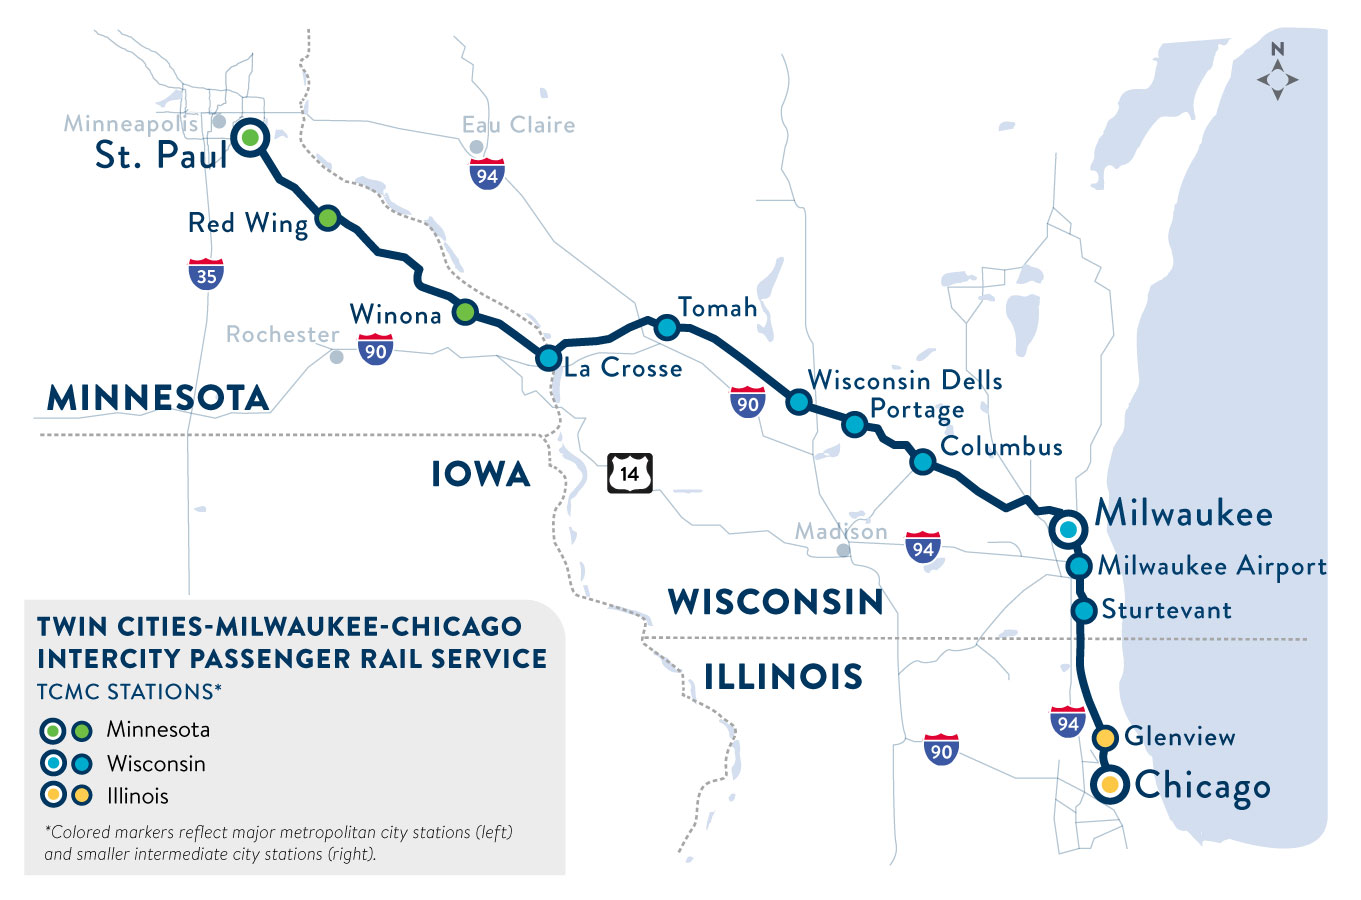 Map of potential Twin Cities-Milwaukee-Chicago intercity passenger rail service (formerly referred to as 2nd Train).